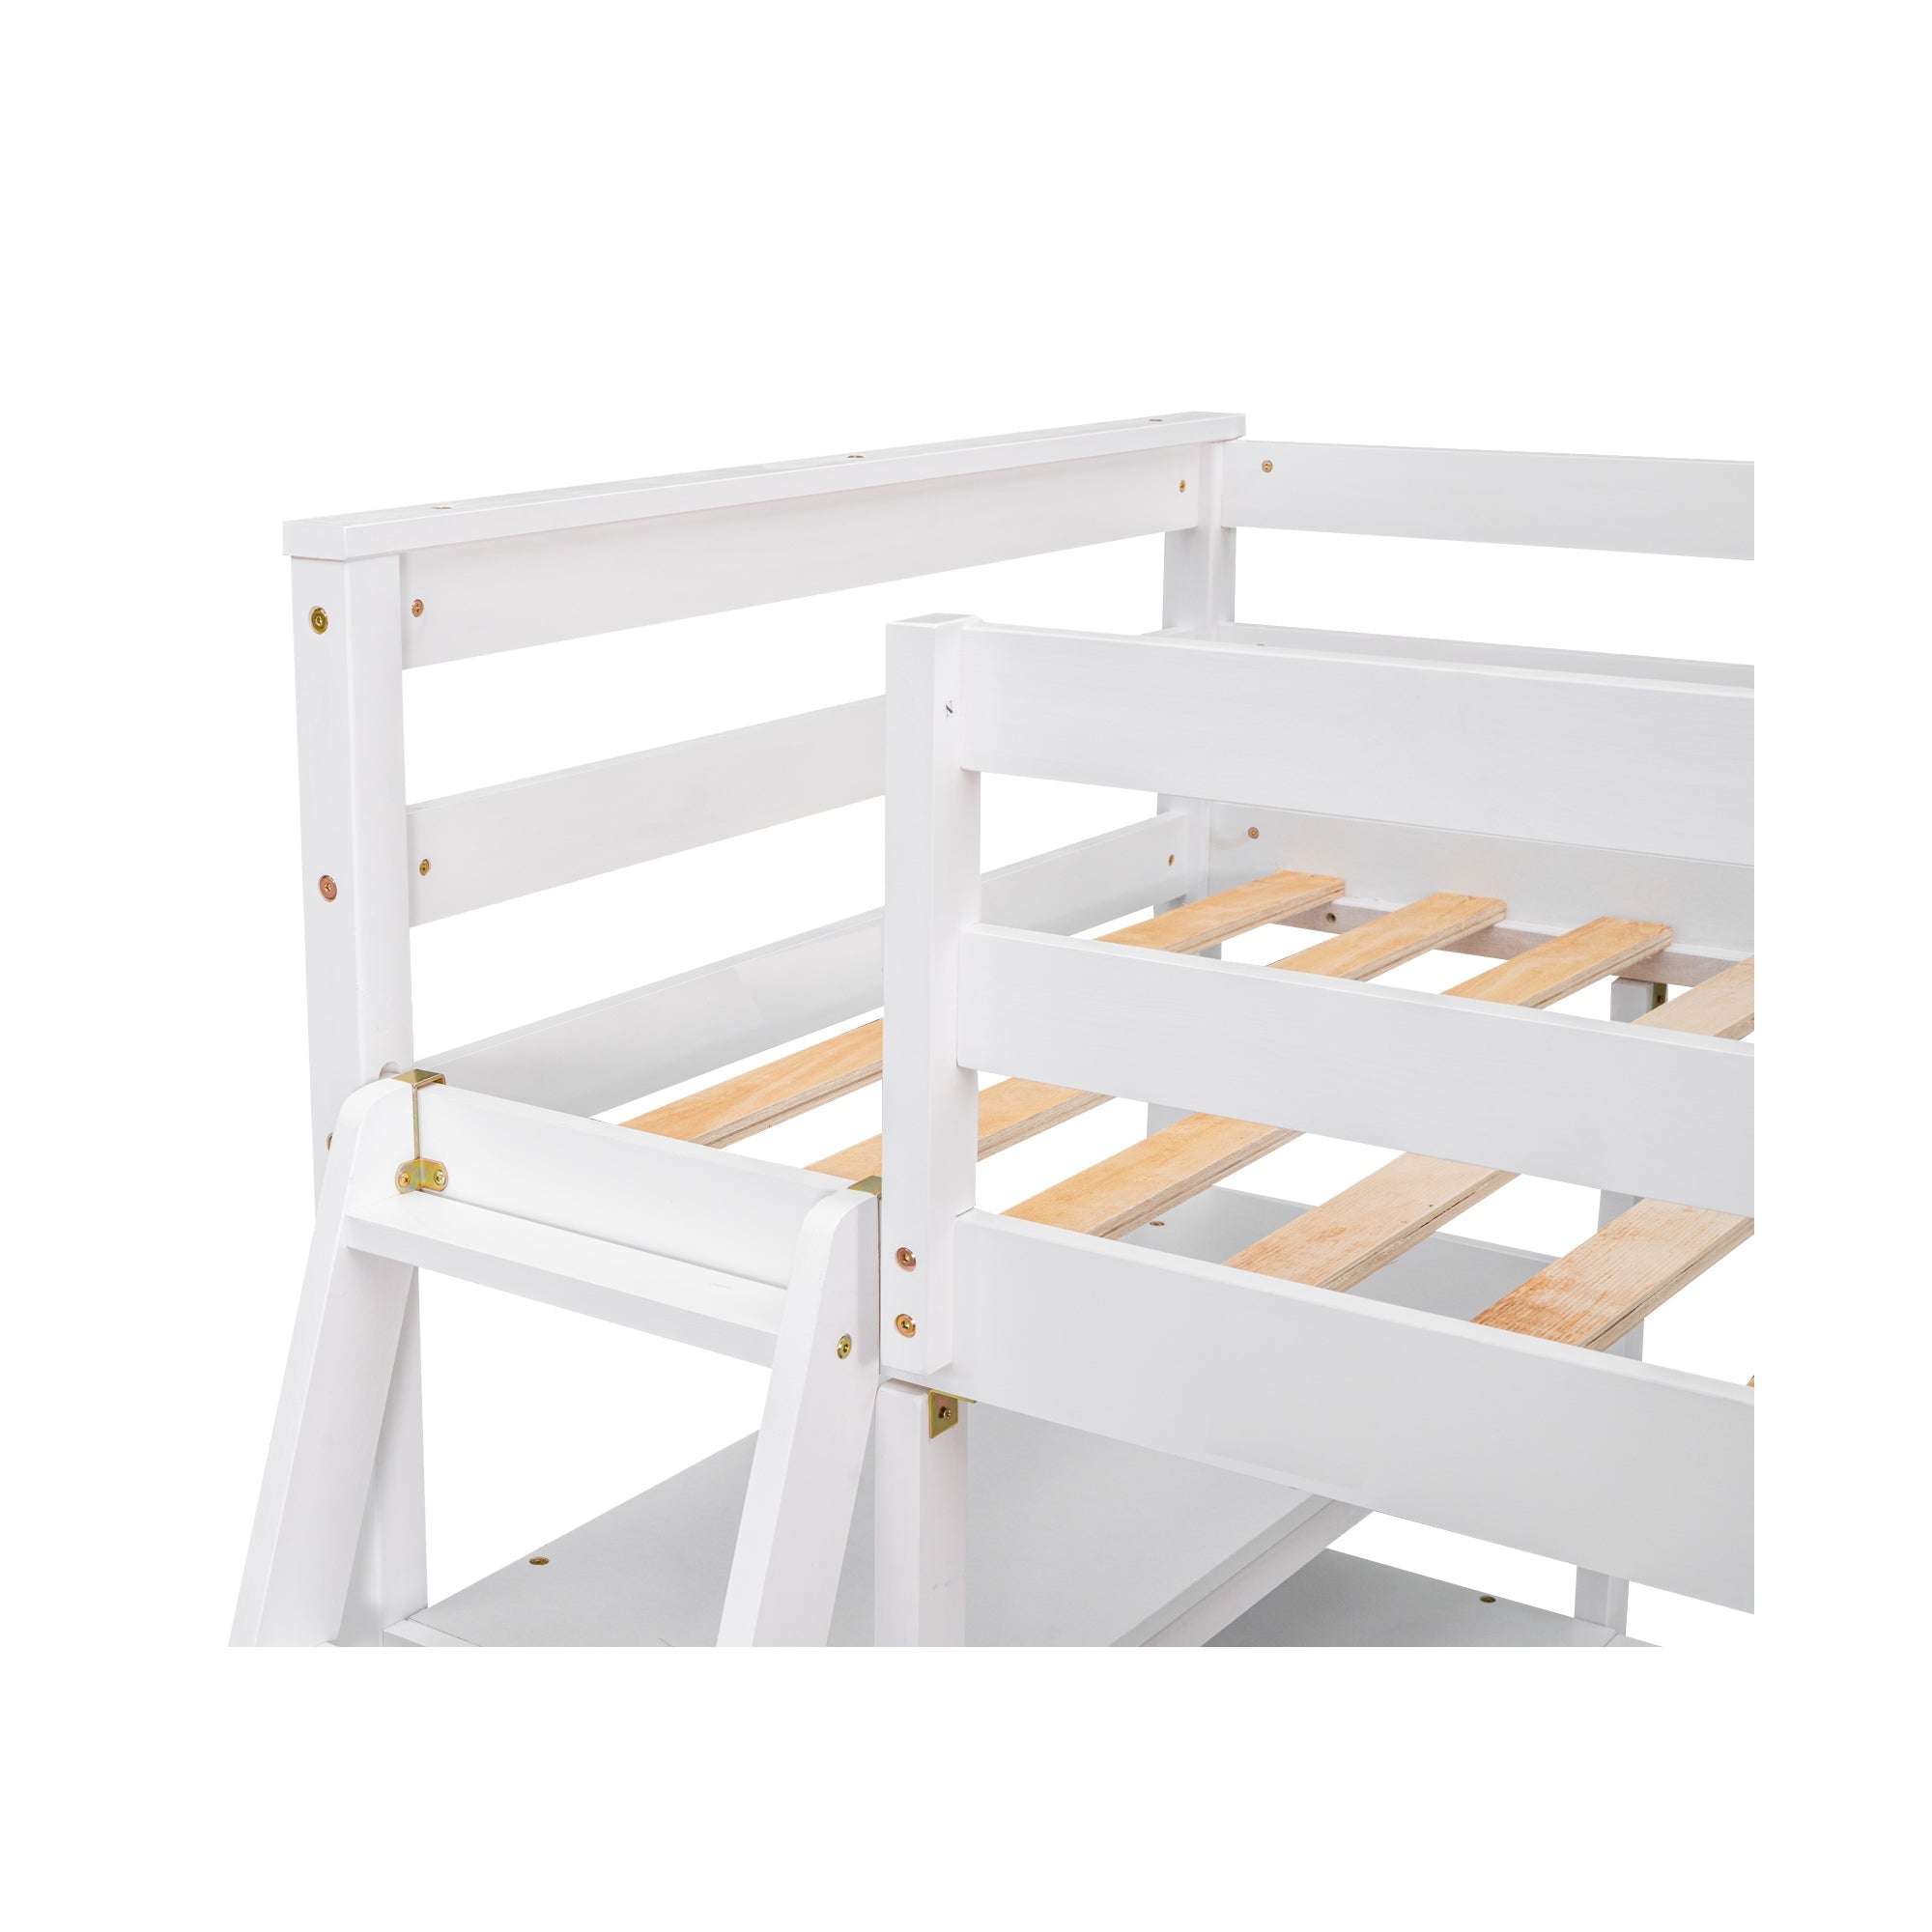 Euroco Twin Loft Bed with Desk for Child, White